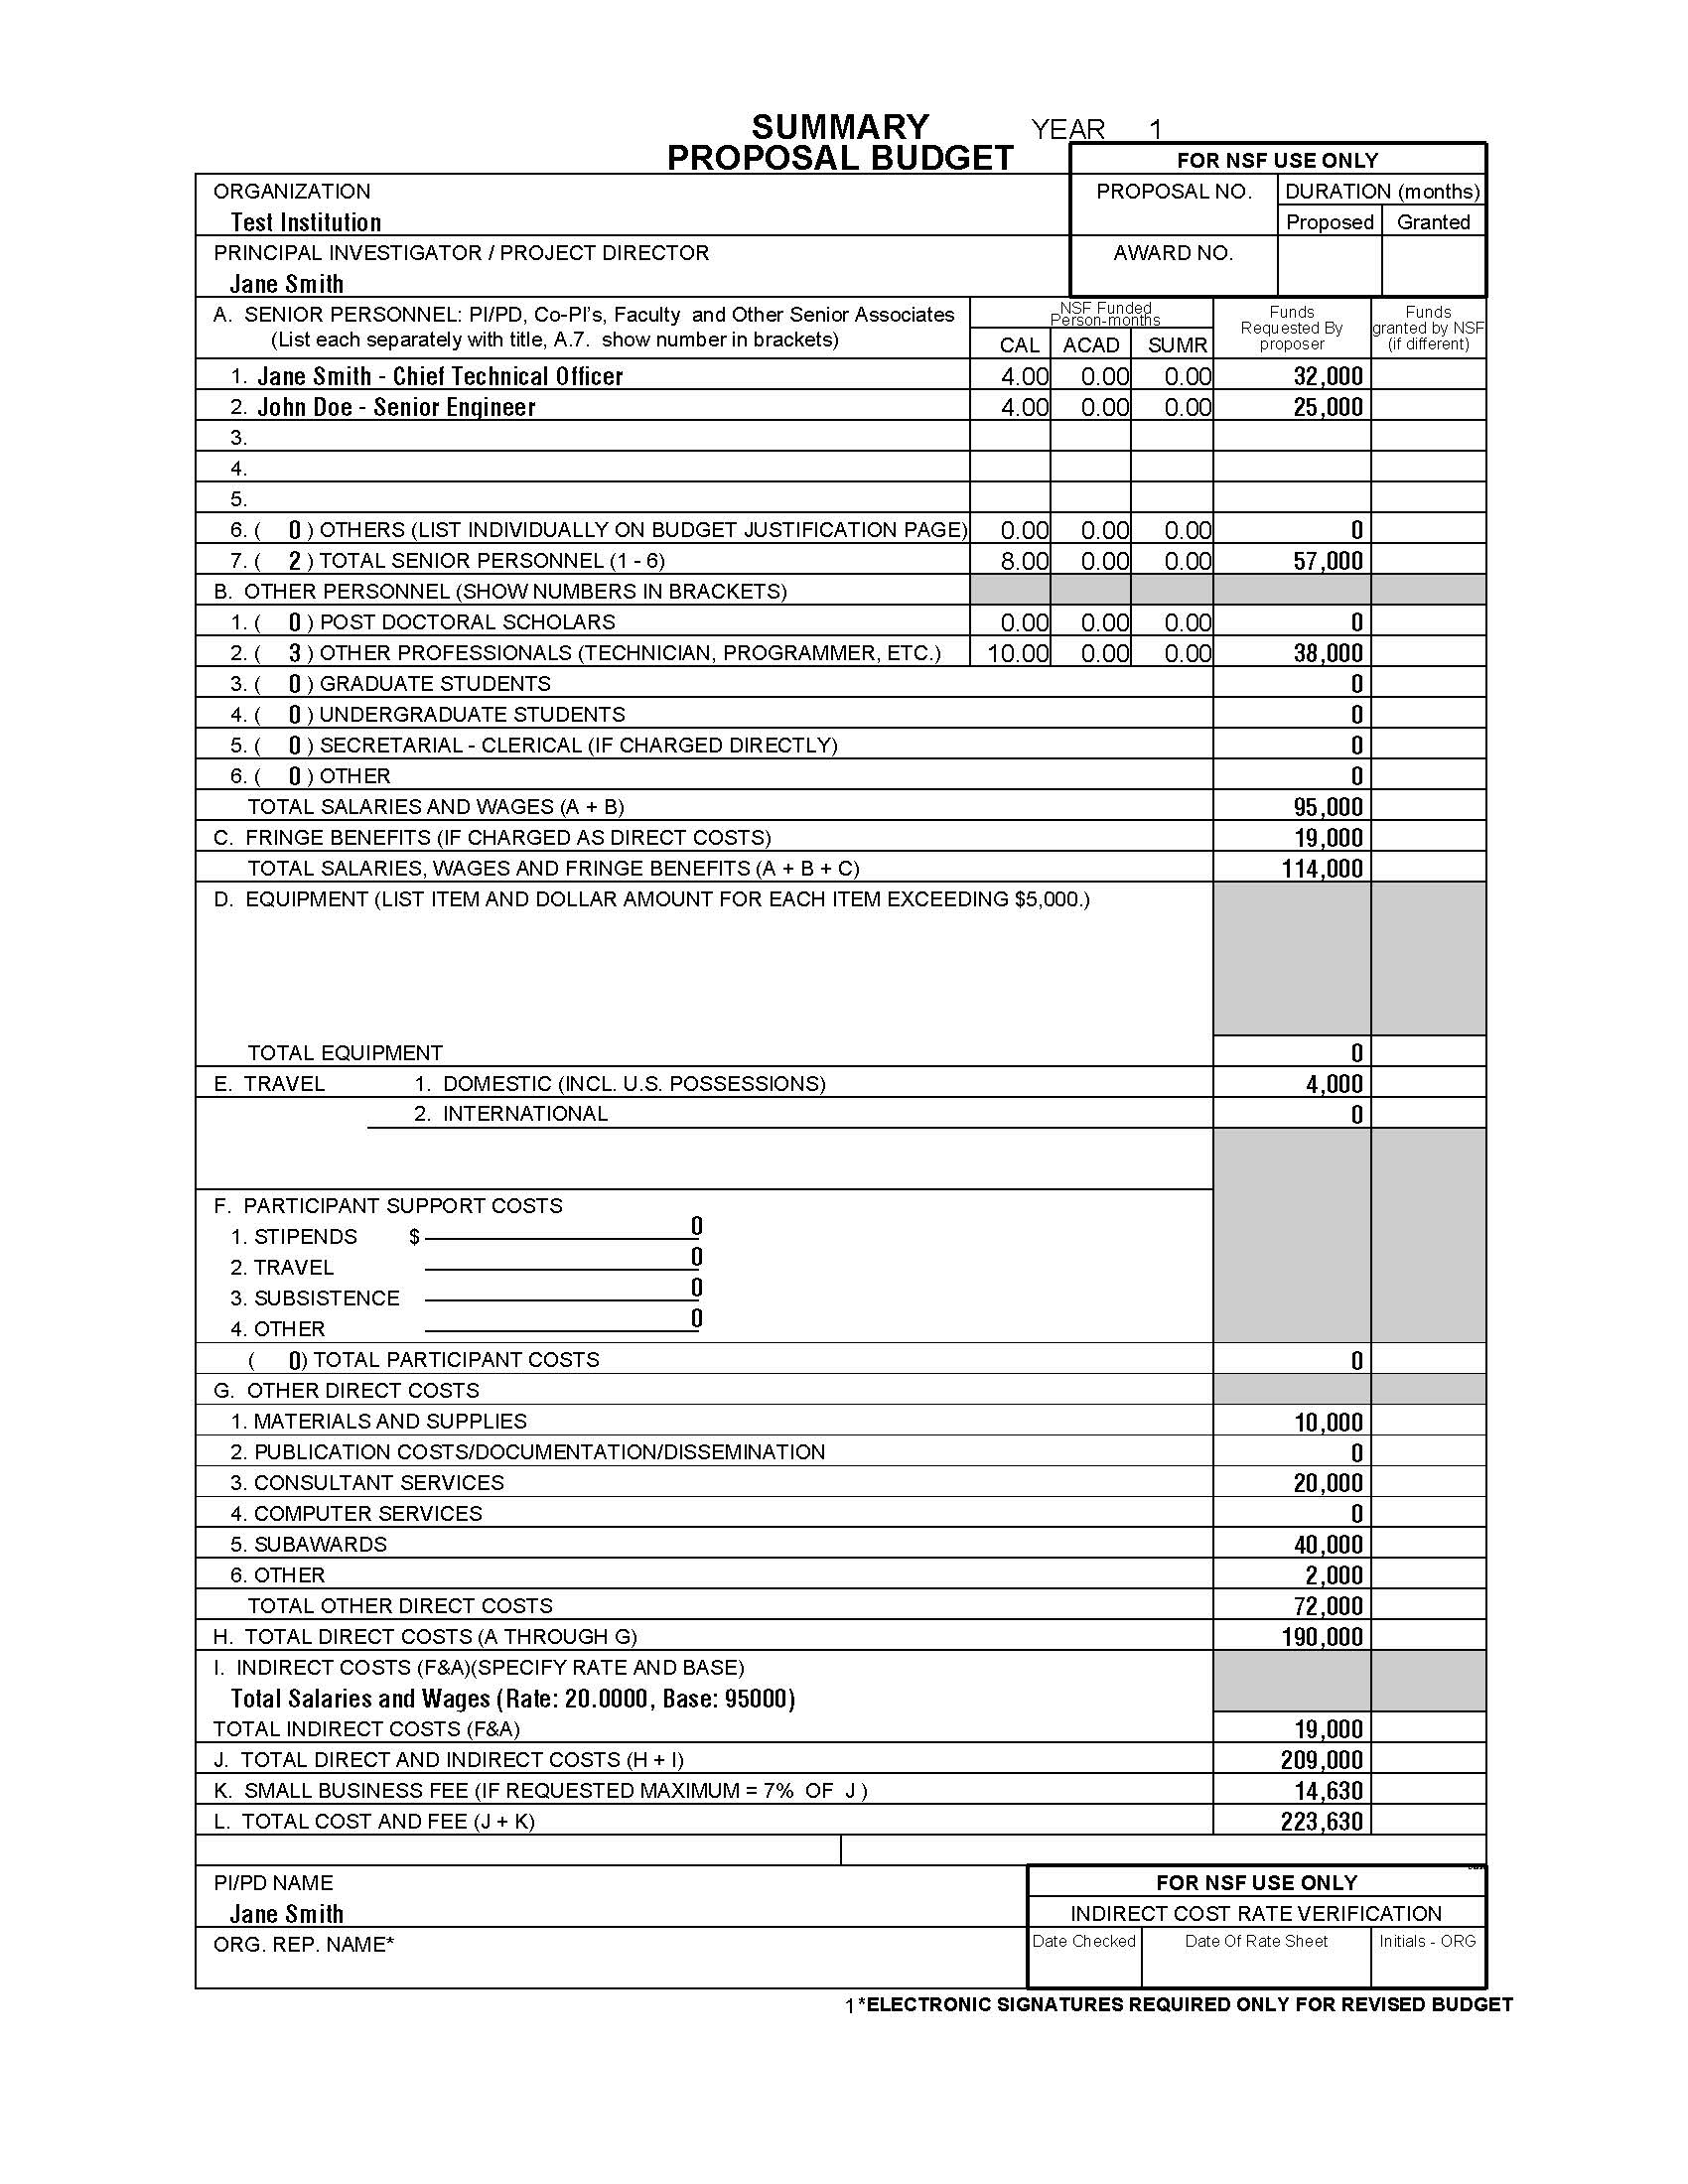 PDF of example proposal budget filled out